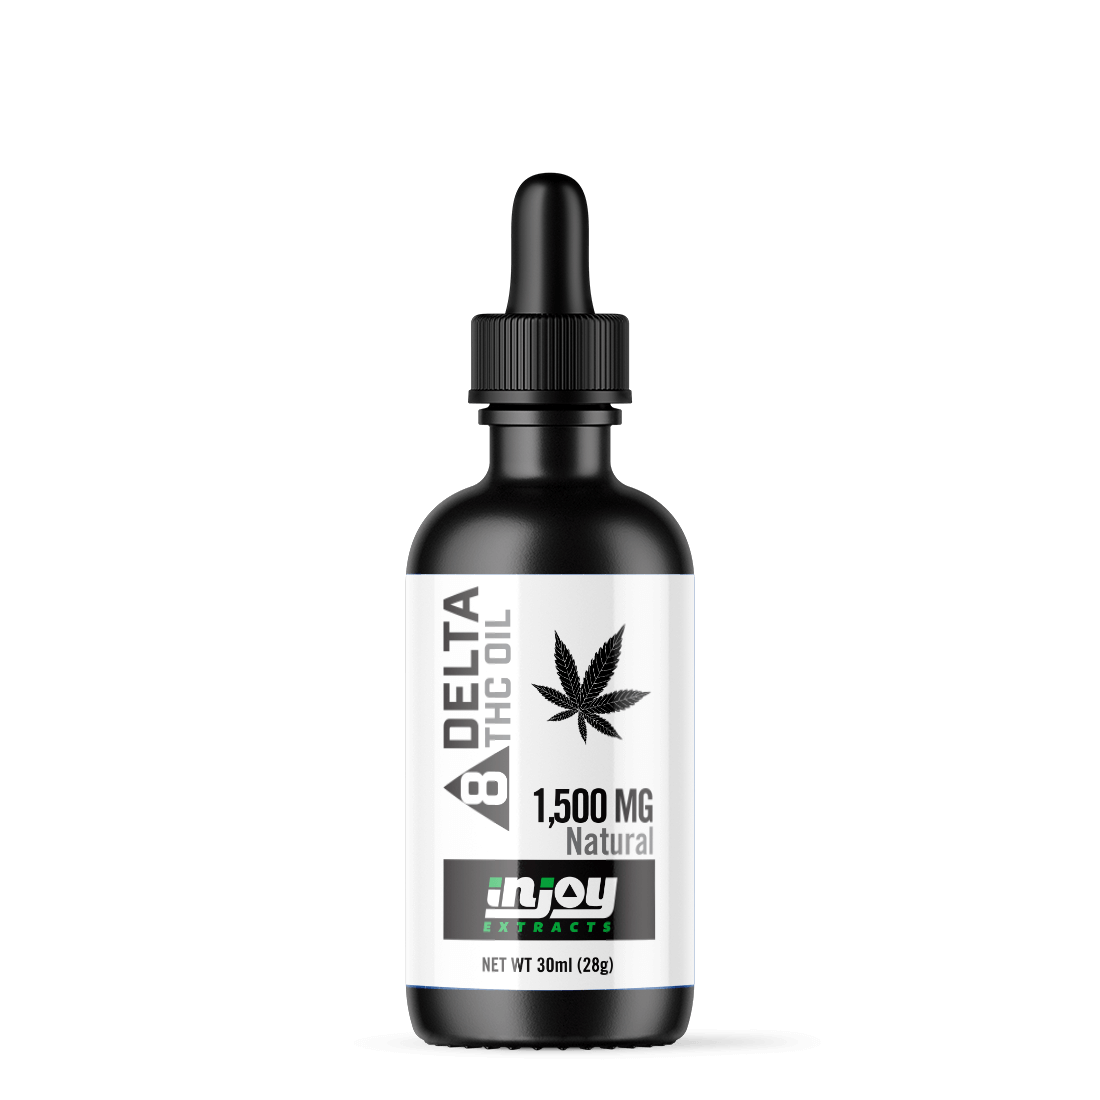 Delta 8 tincture 1500mg - natural flavor - Wholesale Injoy Extracts